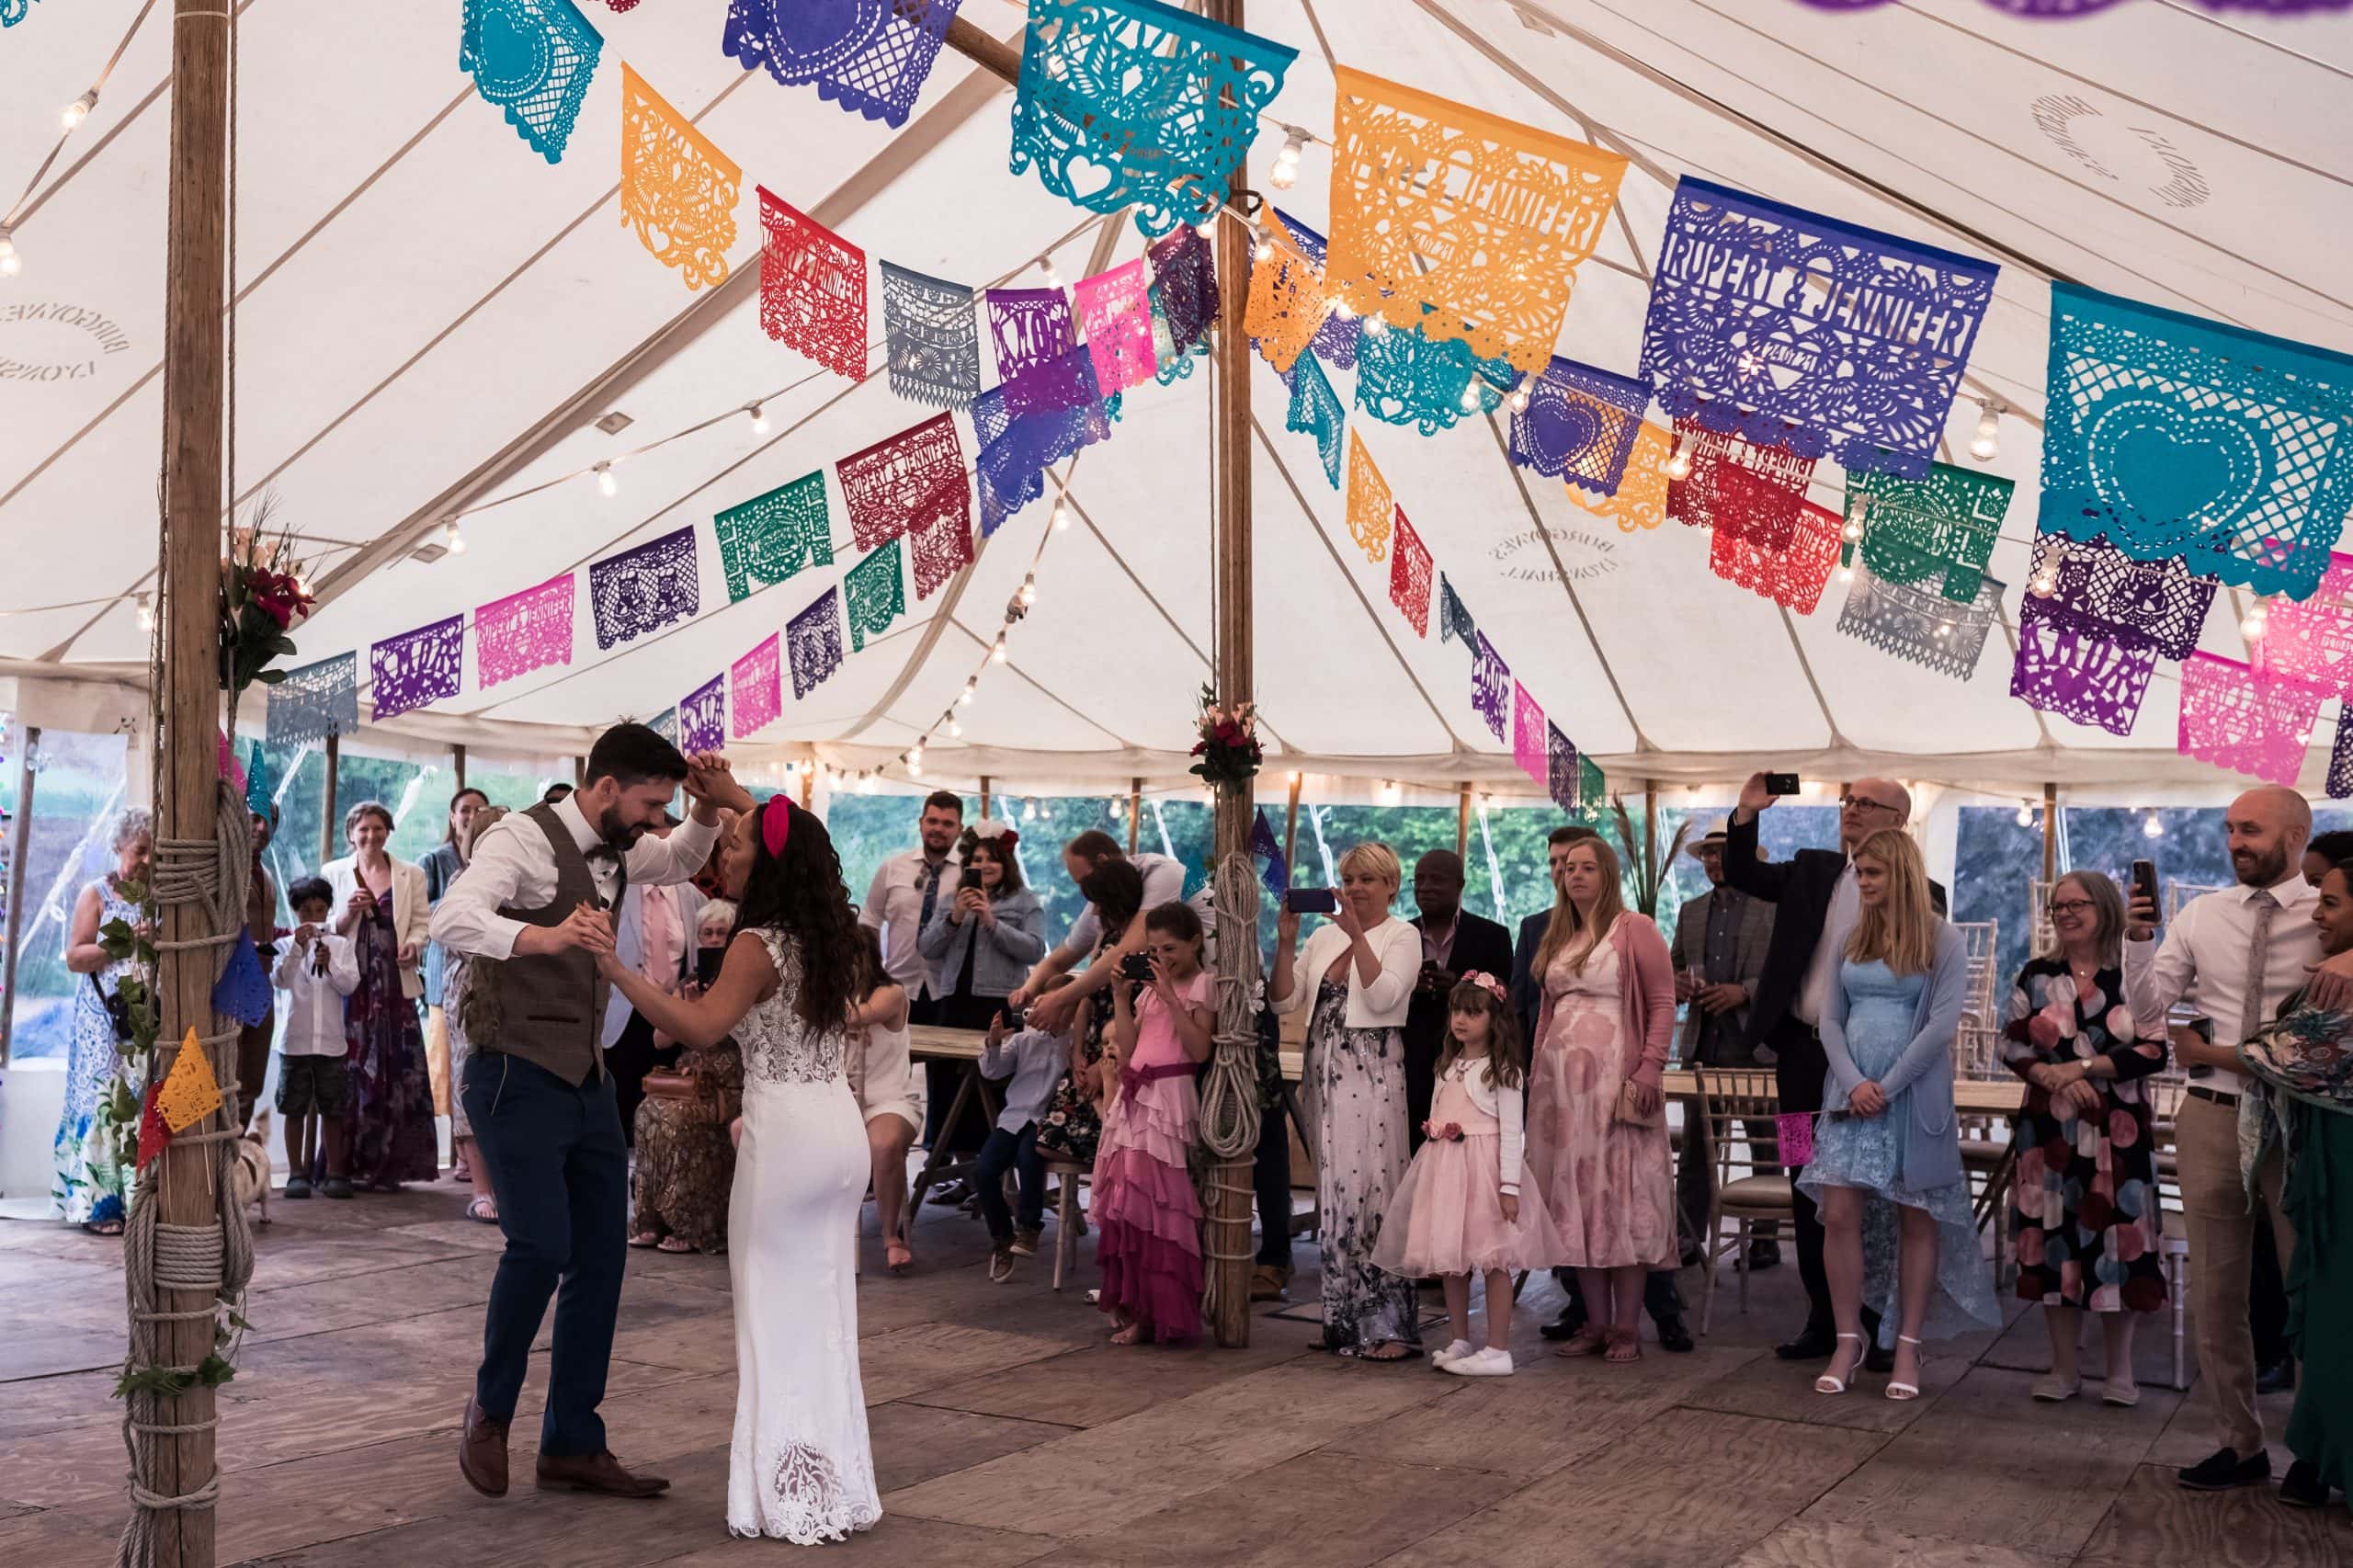 Bride and groom party like no one is watching in this Mexican inspired wedding